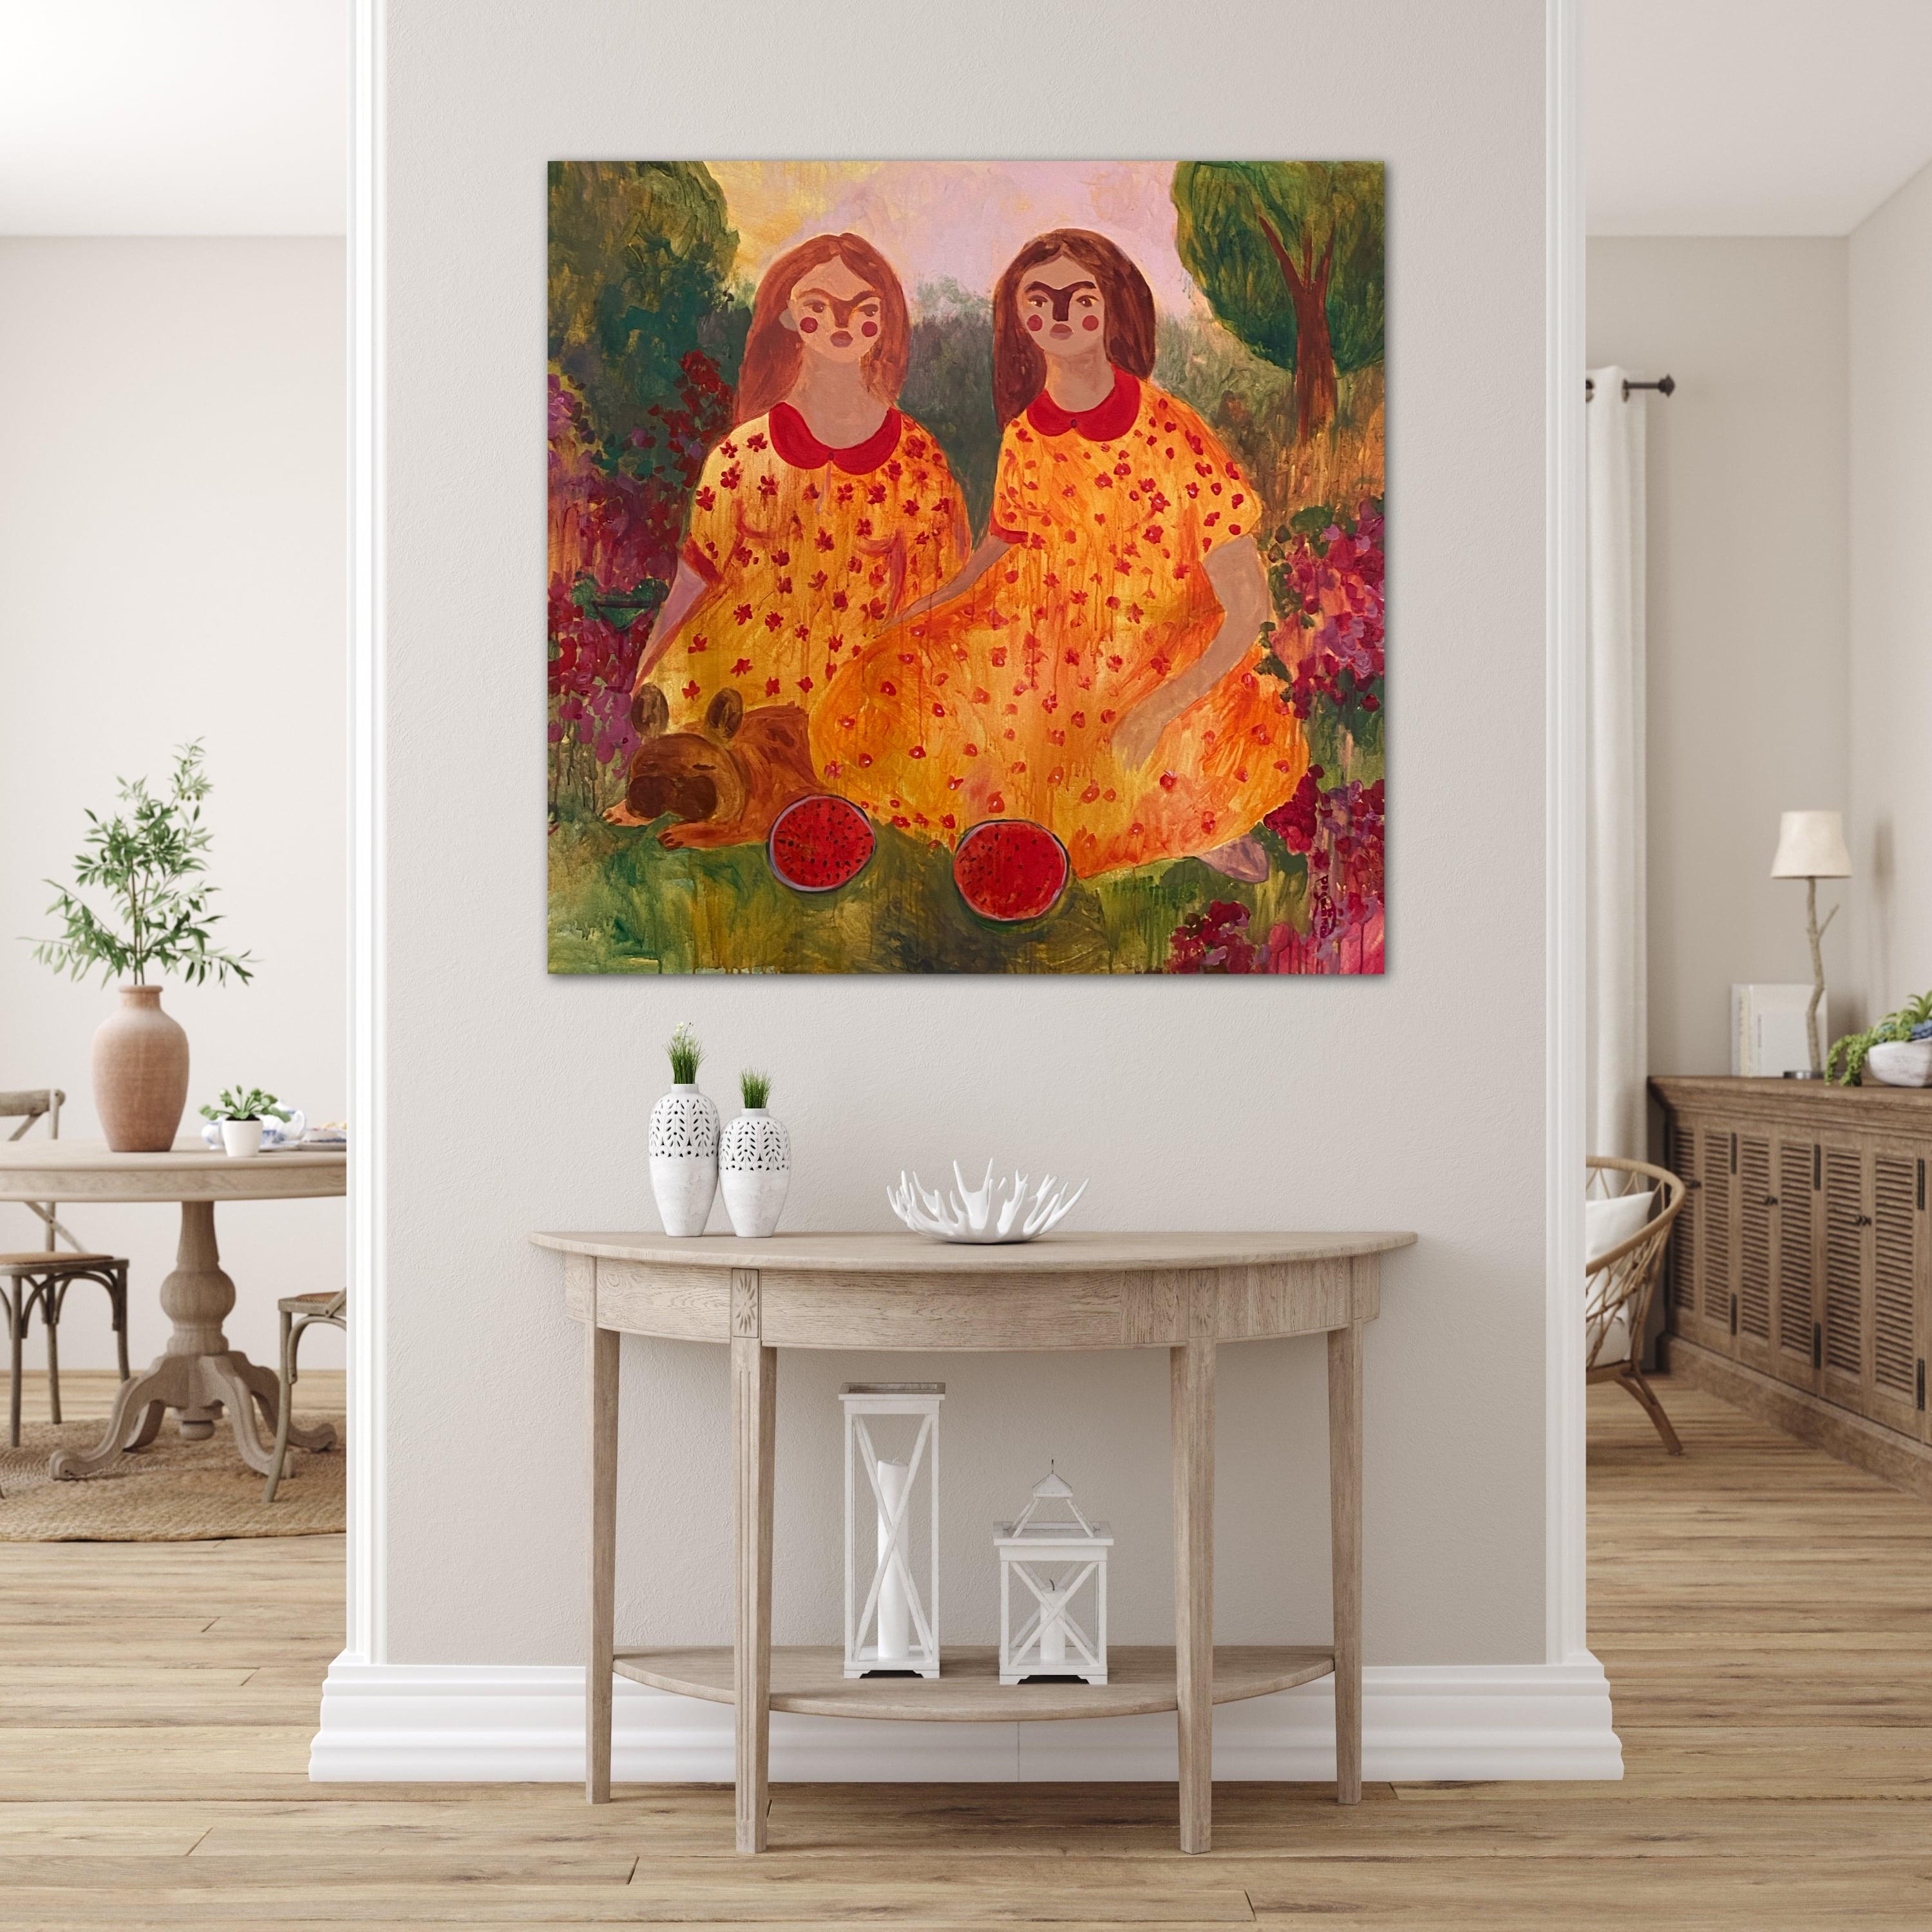 This painting will come to you stretched on a wooden stretcher and completely ready to be placed in the interior.

ABOUT THE ARTWORK
In the work 'Sisters at a Picnic in the Garden,' I captured an intimate moment of family connection and joy that